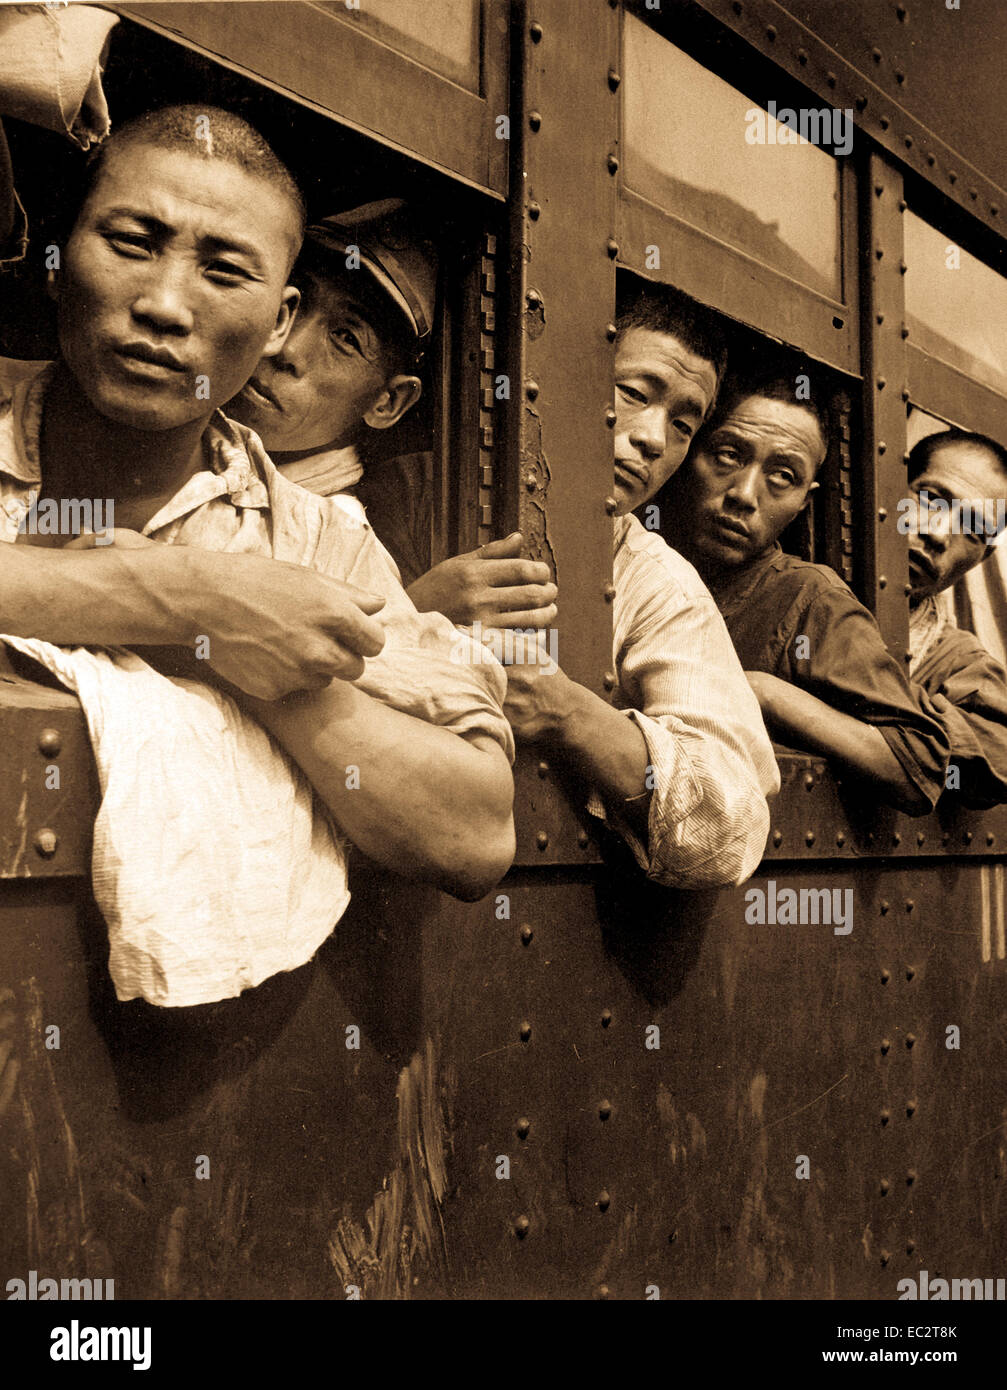 Discharged Japanese soldiers crowd trains as they take advantage of free transportation to their homes after end of World War II in Hiroshima, Japan.  September 1945. Stock Photo